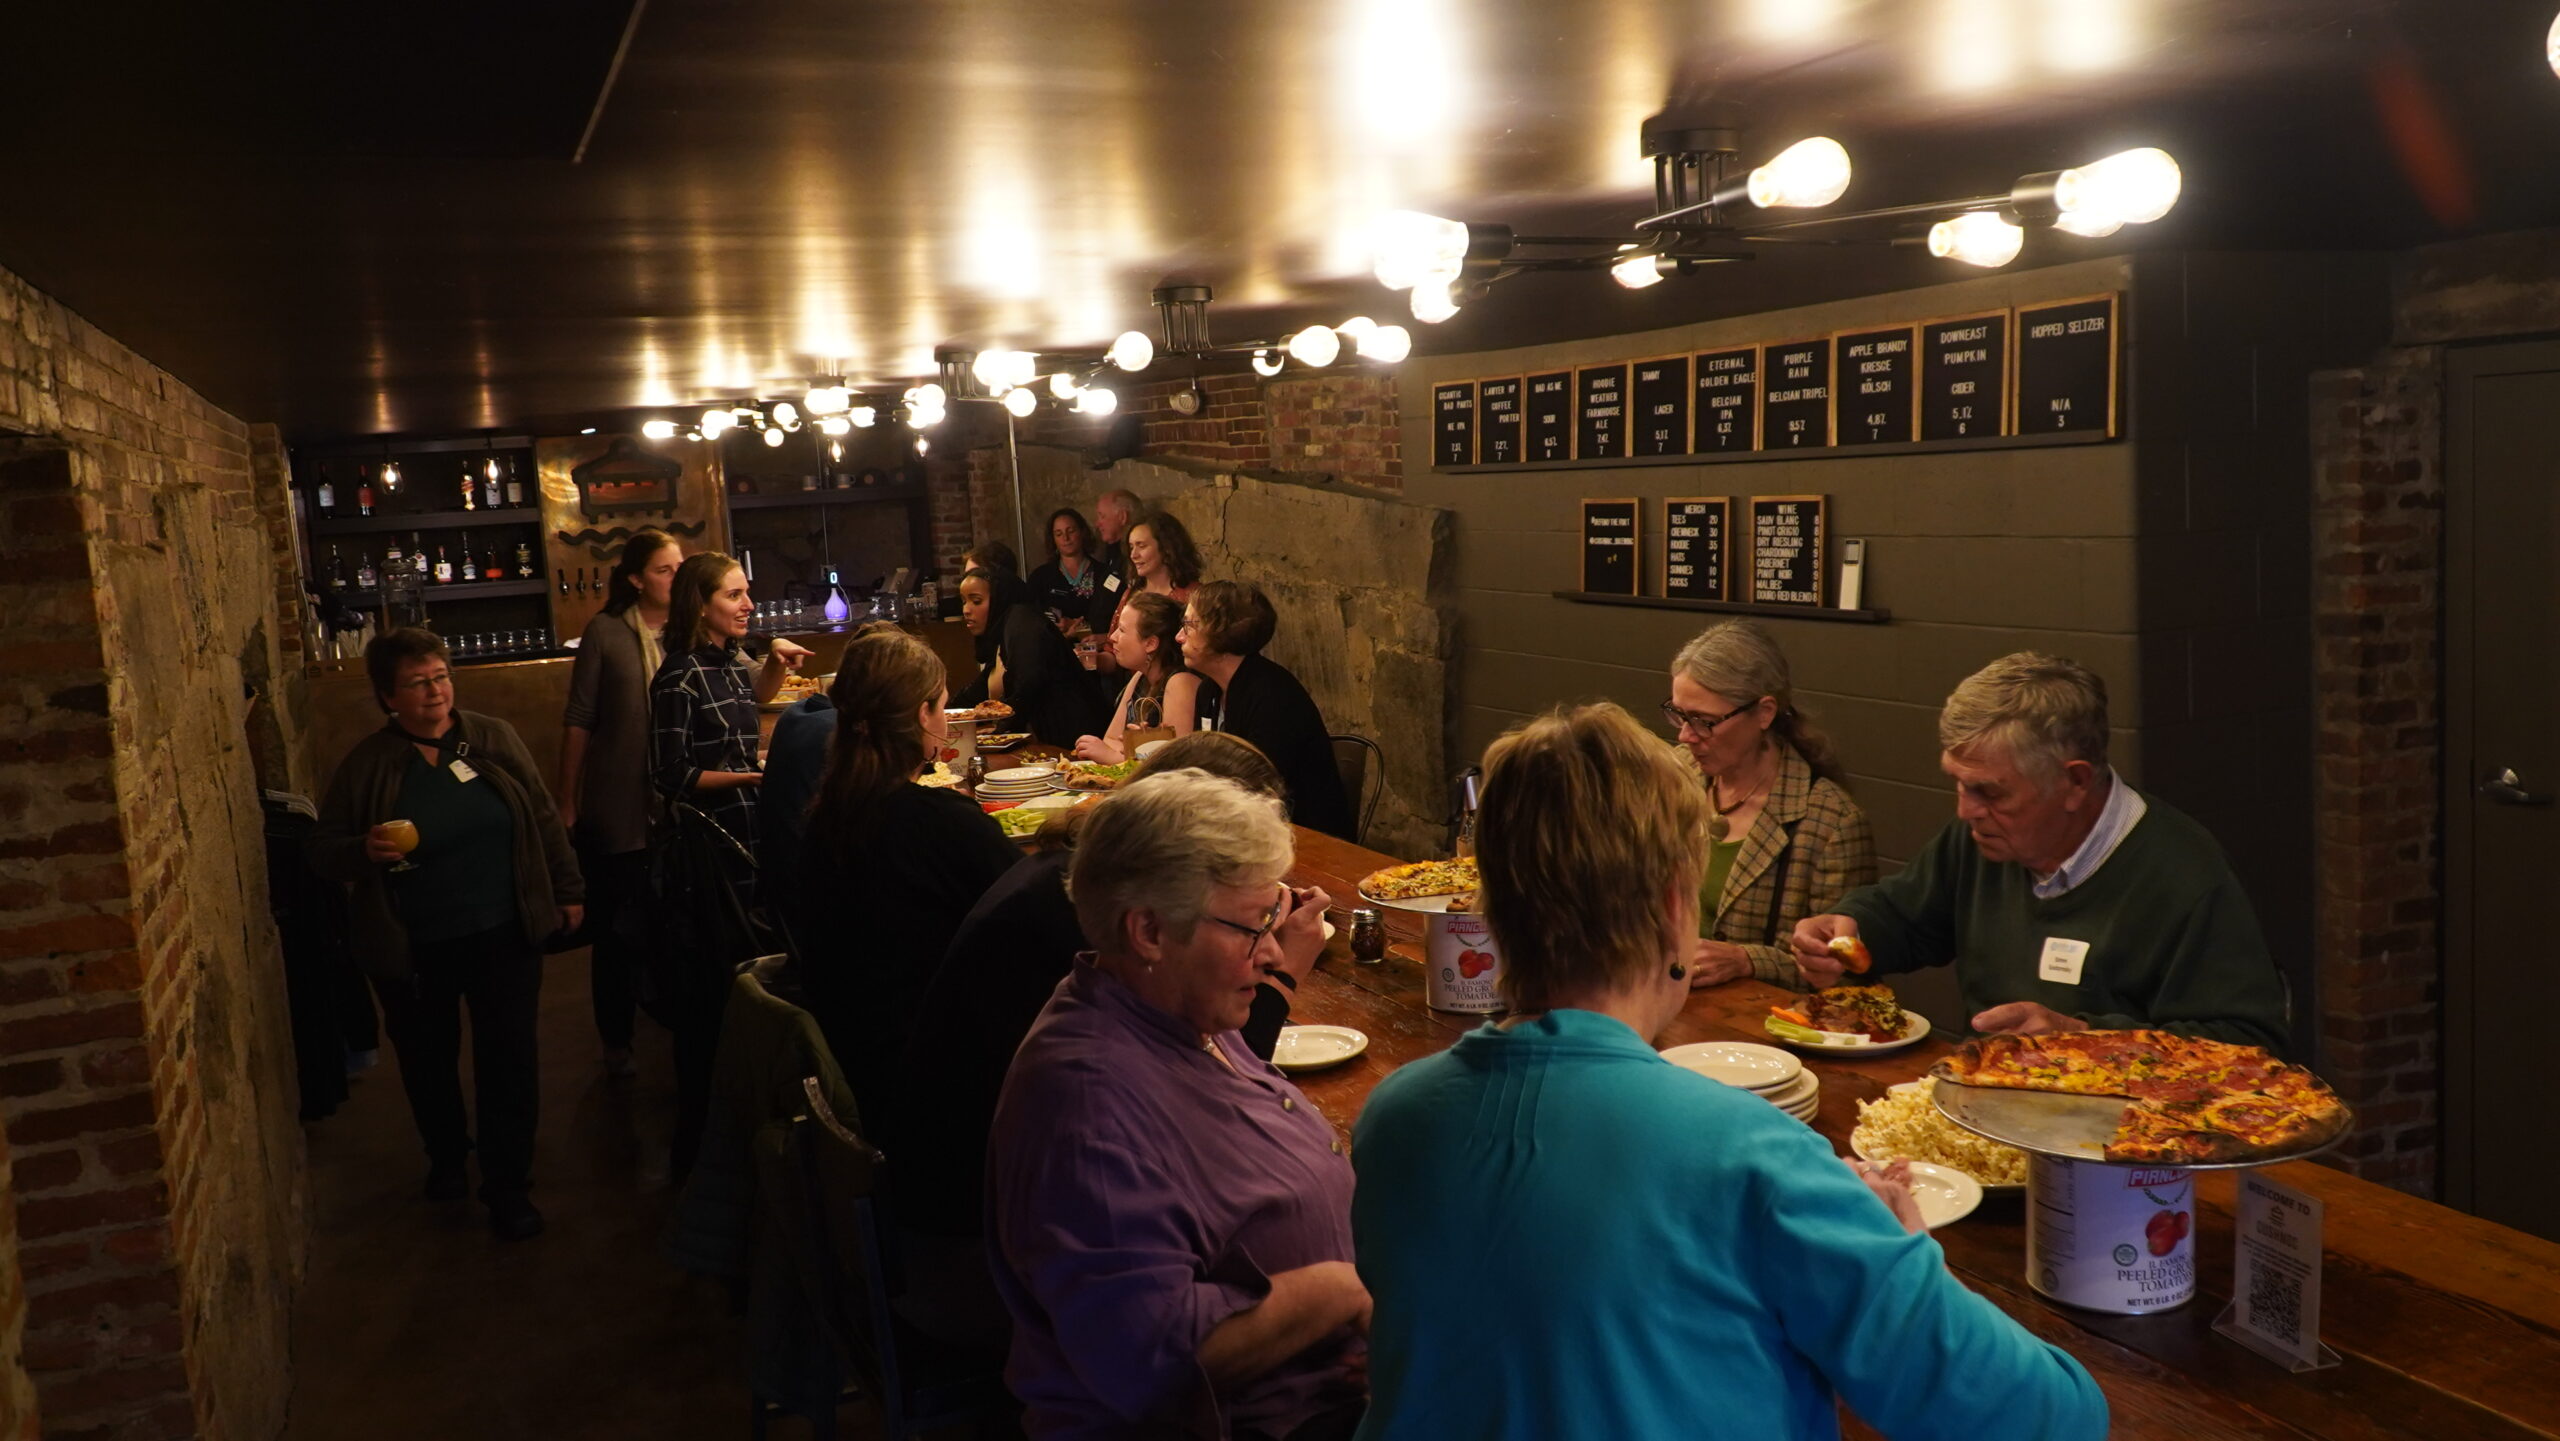 MMSA staff and board members can be seen under moody lighting eating, drinking, and conversing at Cushnoc's basement tap room.